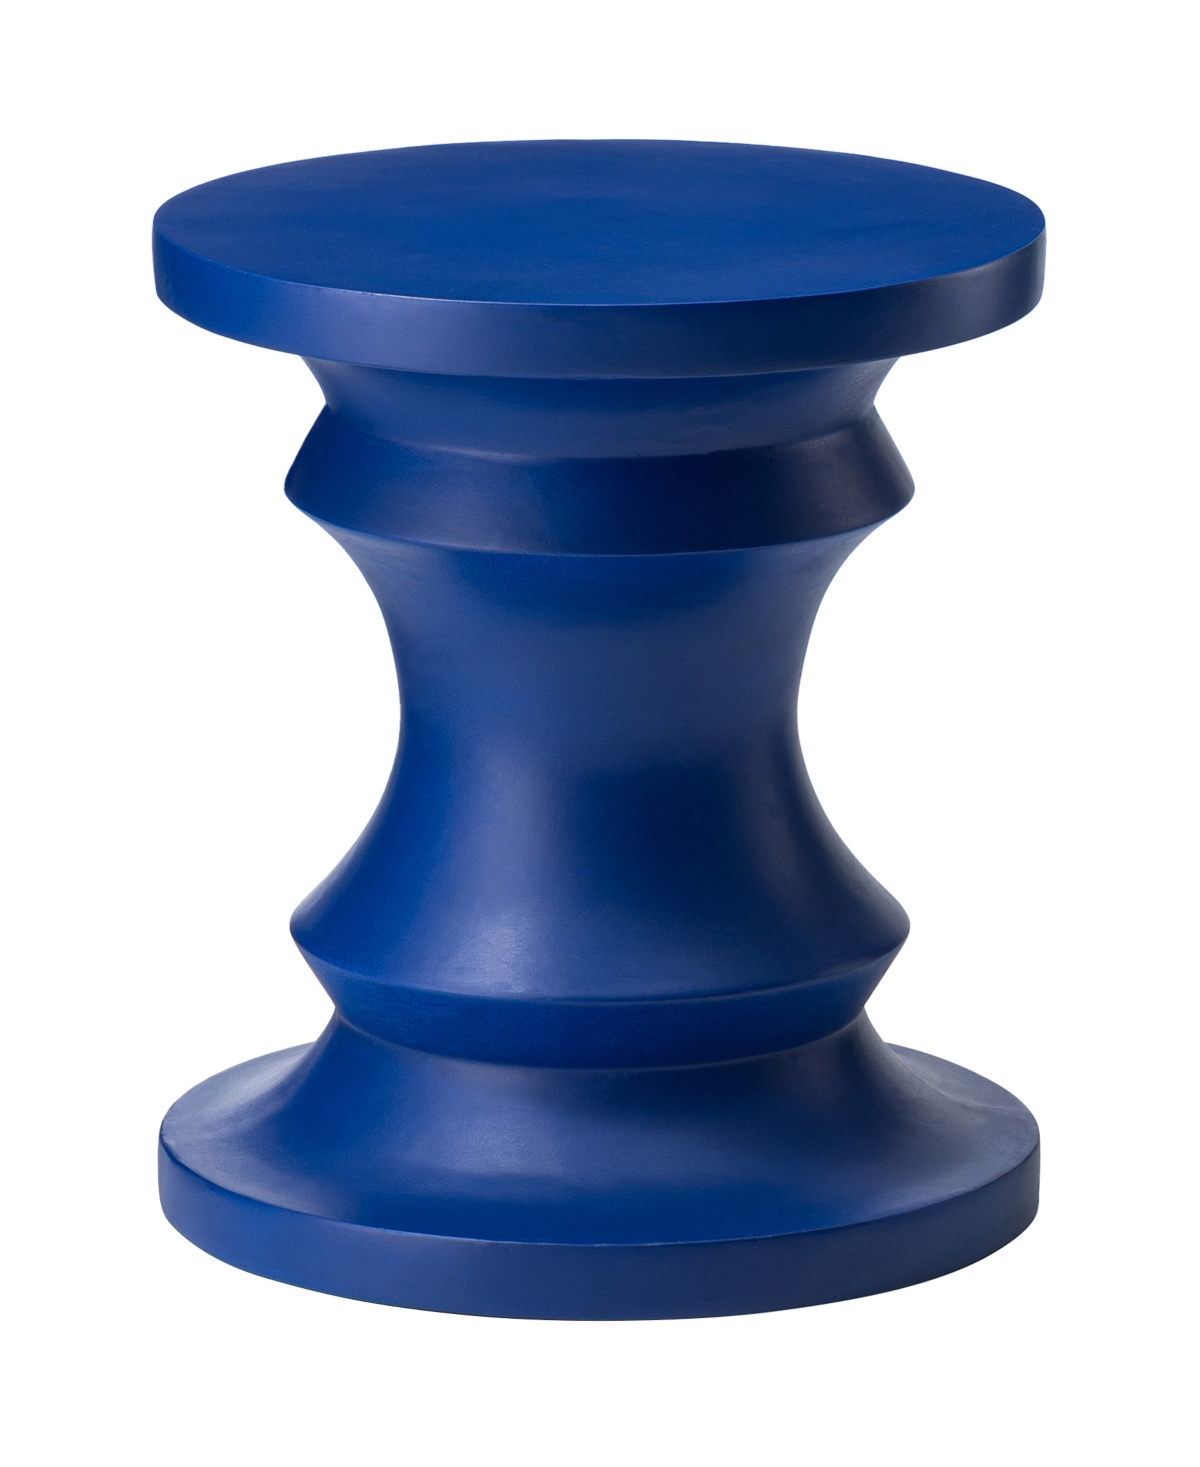 Multi-functional Cobalt Blue Chess Garden Stool or Planter Stand or Accent Table - Blue